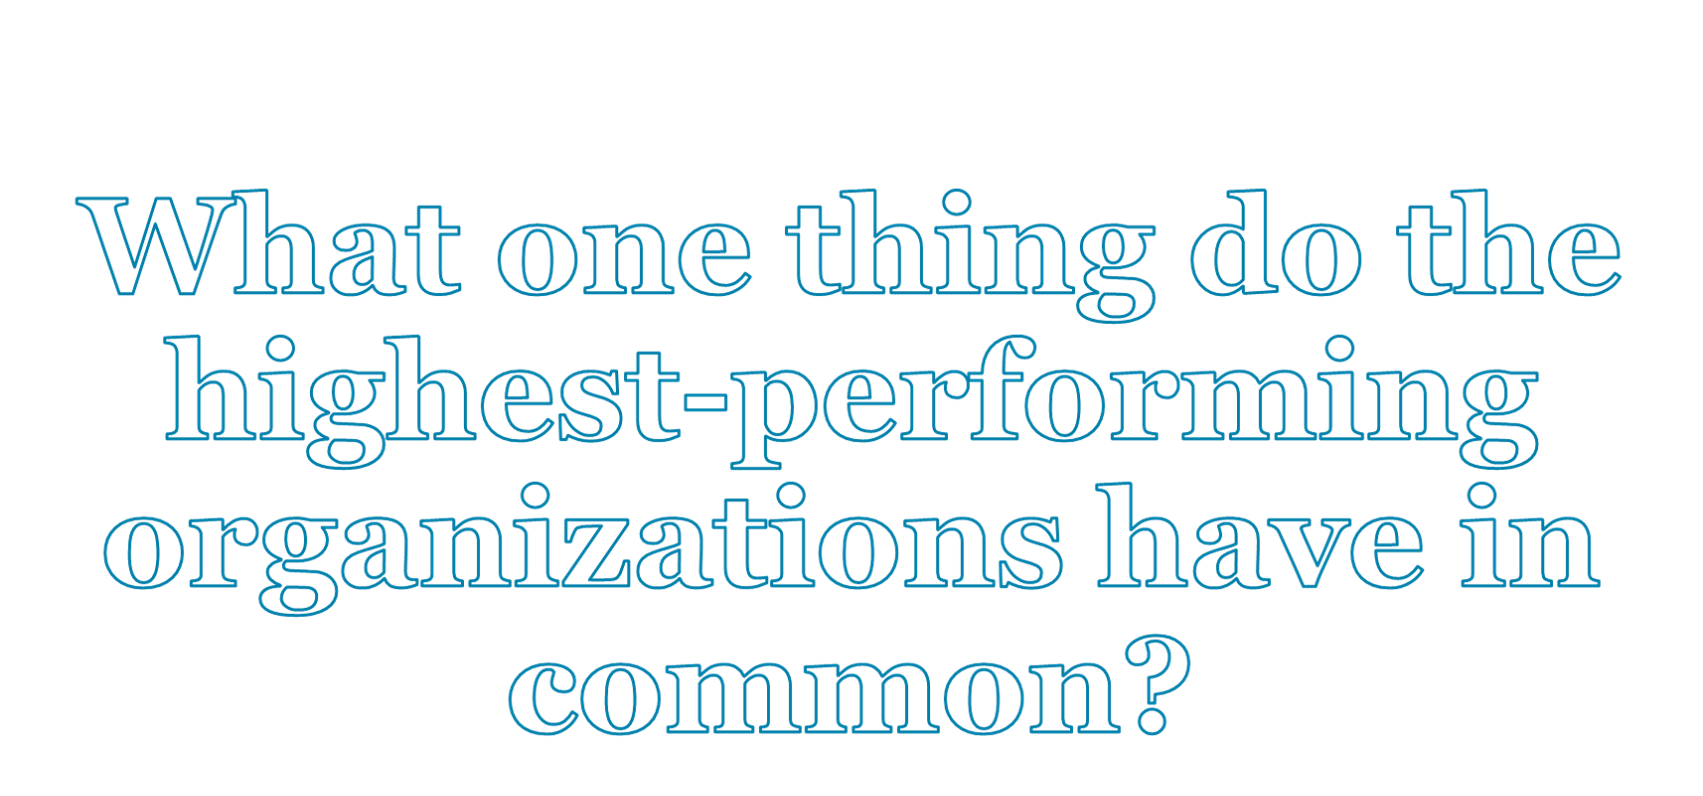 What one thing do the highest-performing organizations have in common?